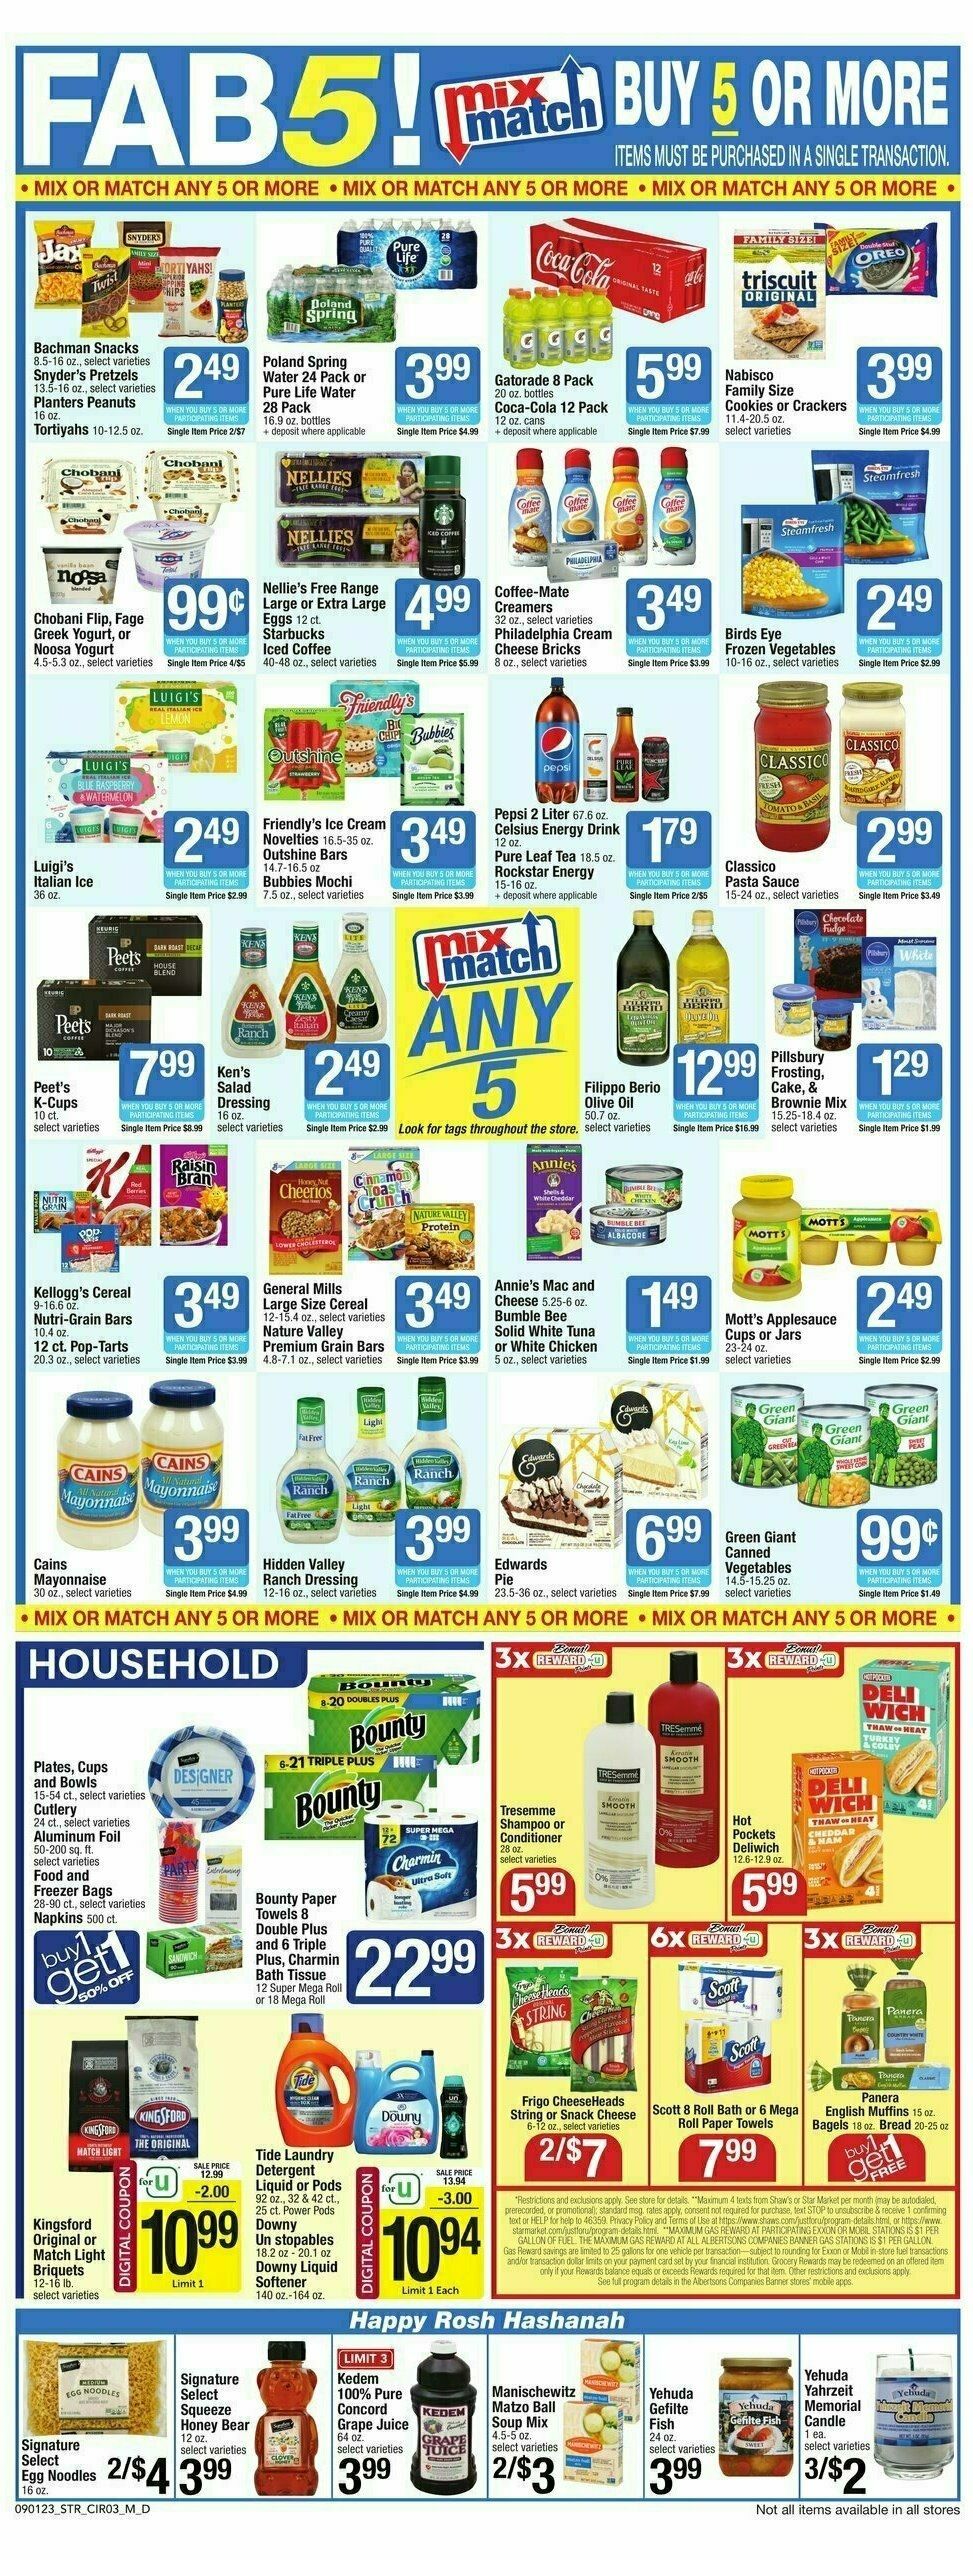 Star Market Weekly Ad from September 1